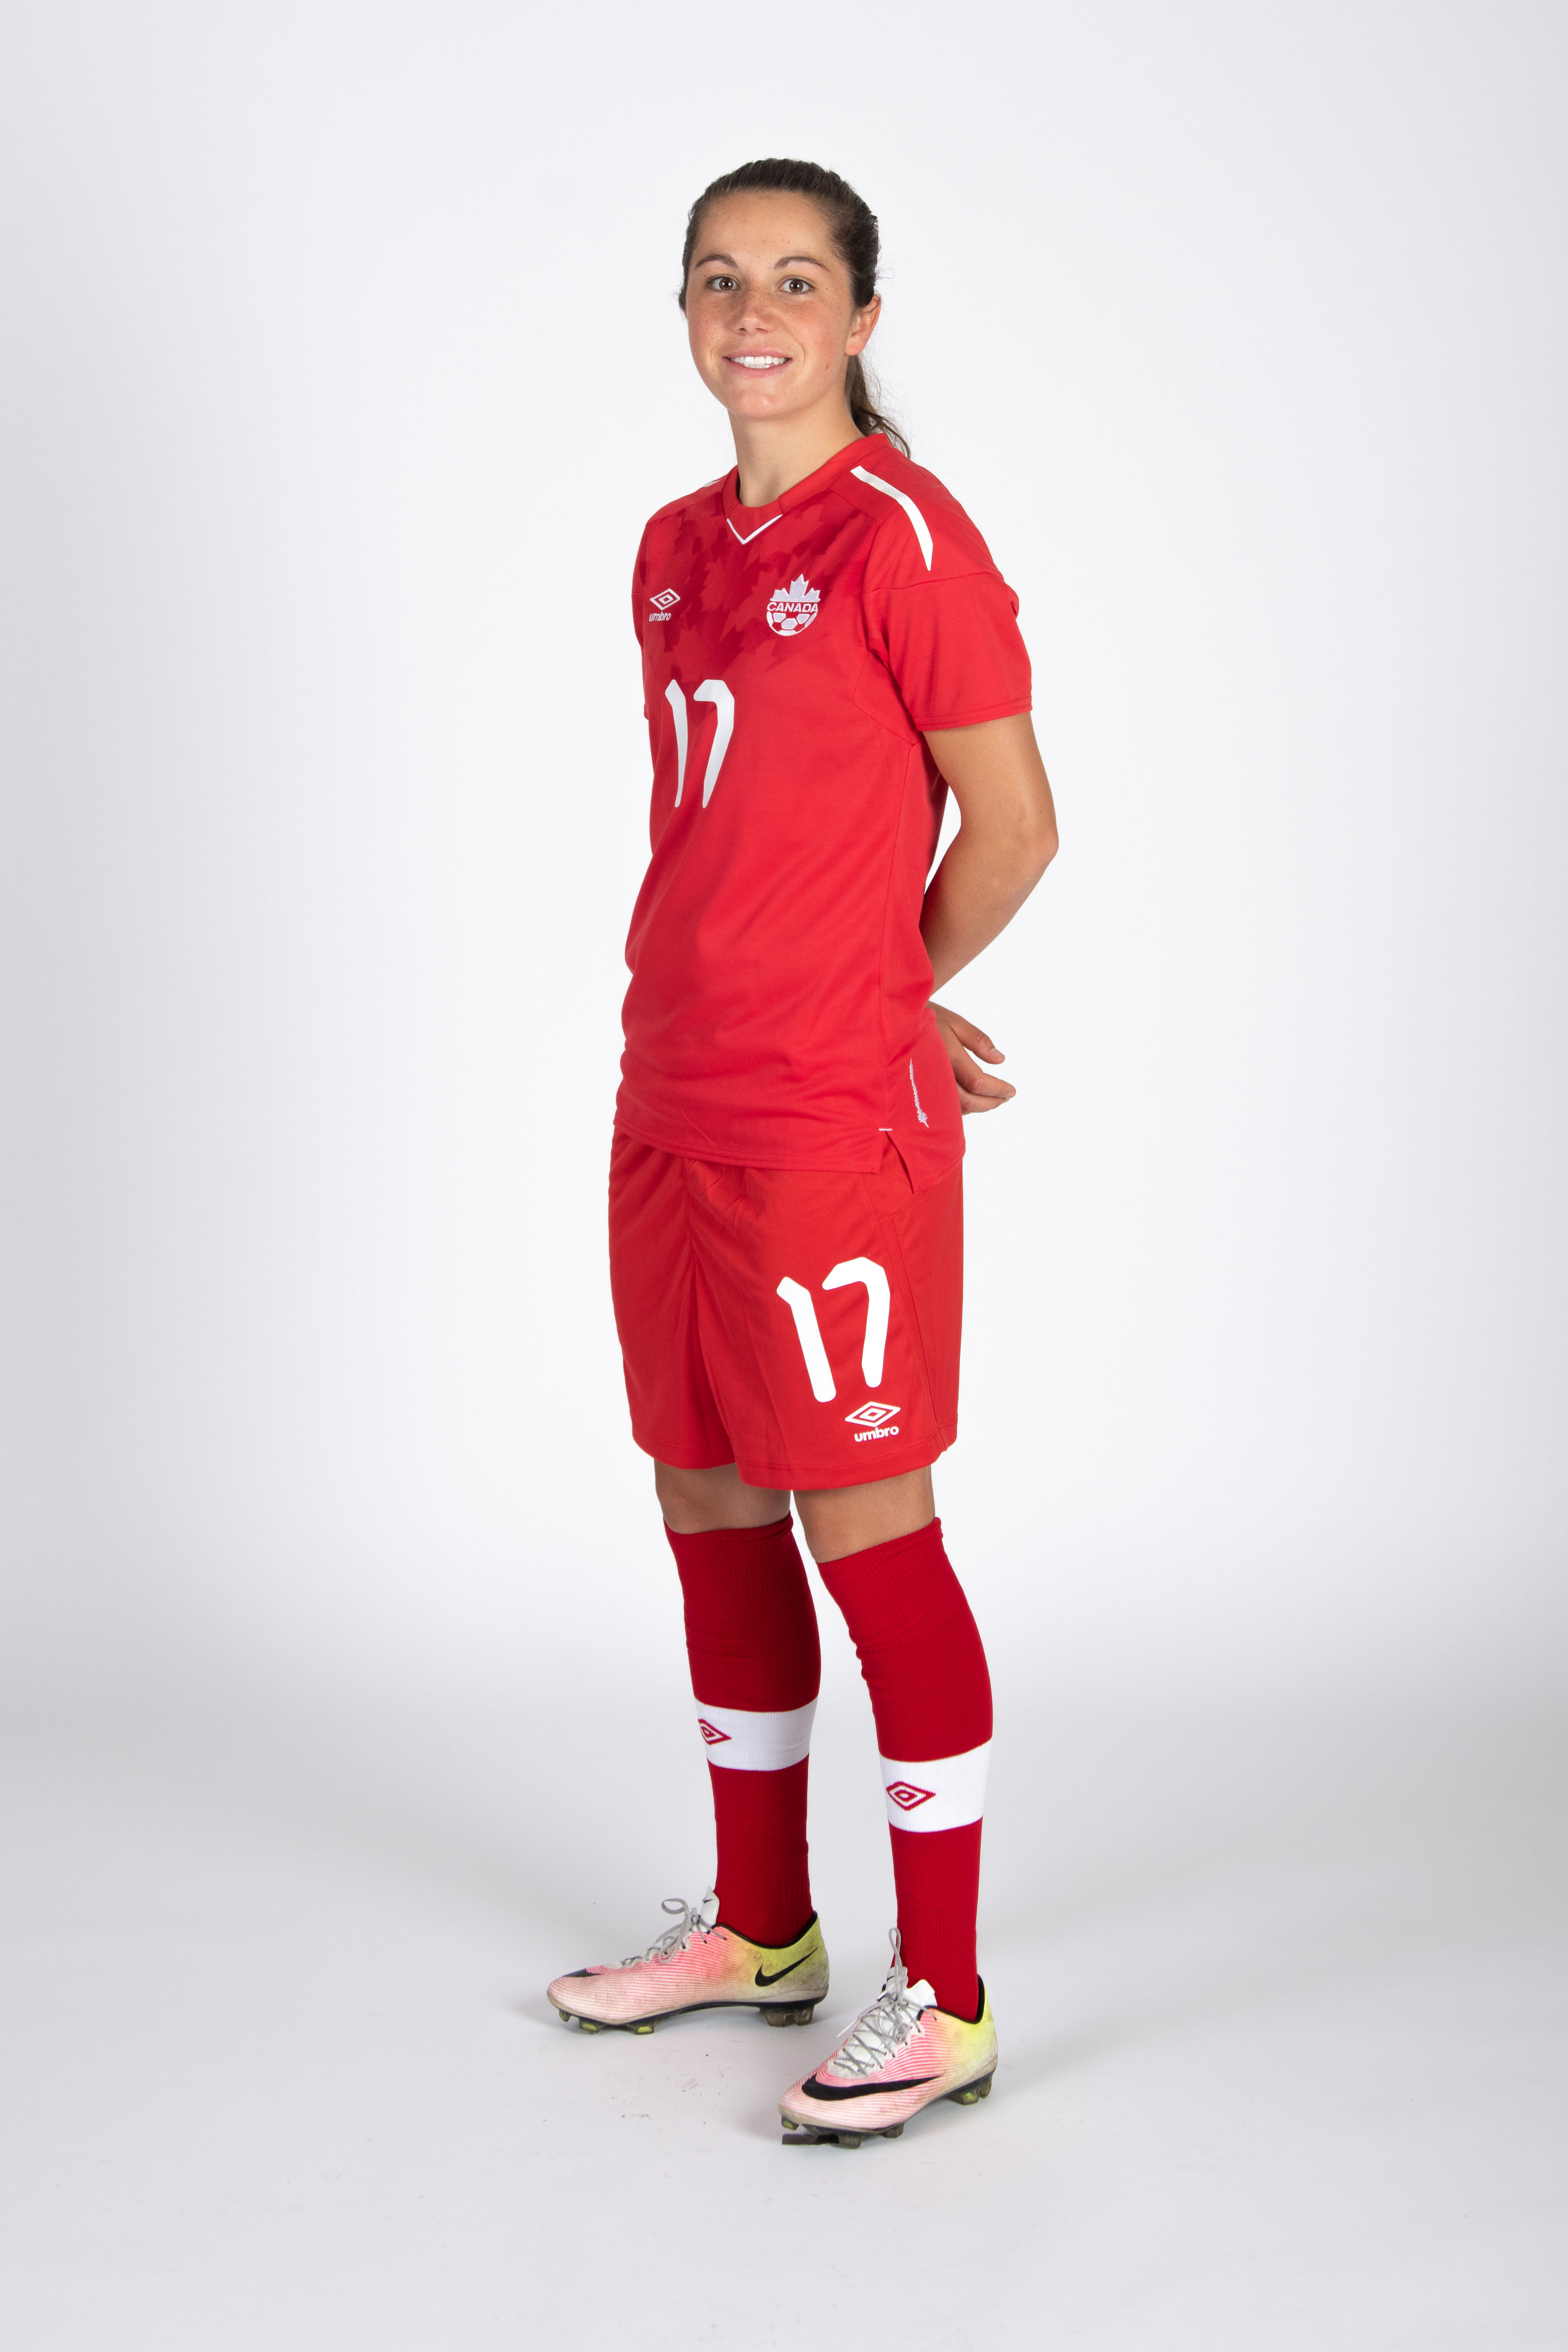 20180604_CANWNT_Fleming_byBazyl21